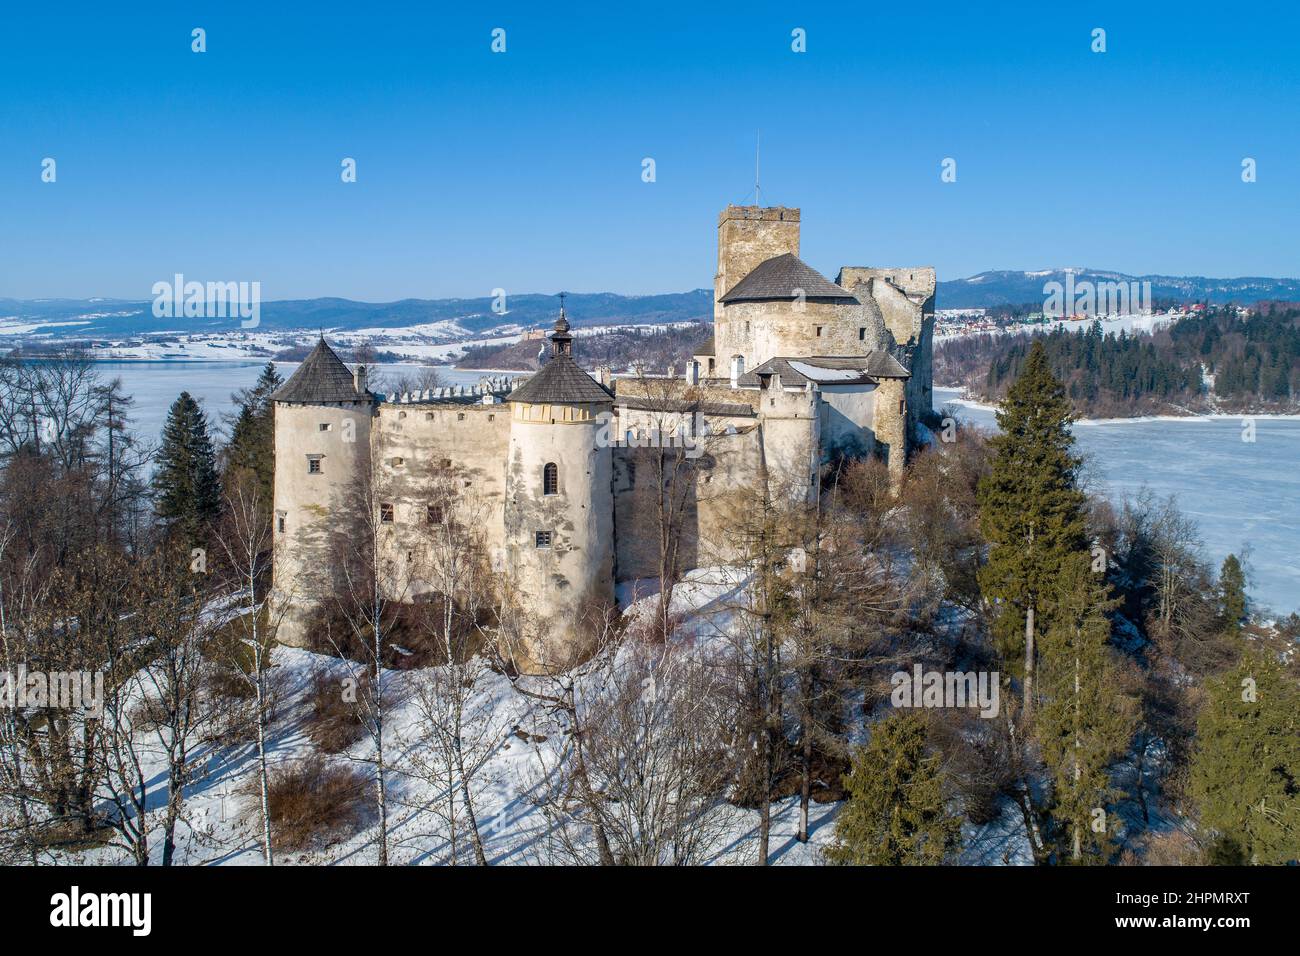 Poland. Medieval castle in Niedzica, dating back to 14th century (upper castle) in winter. Frozen artificial Czorsztyn lake on Dunajec river. Stock Photo